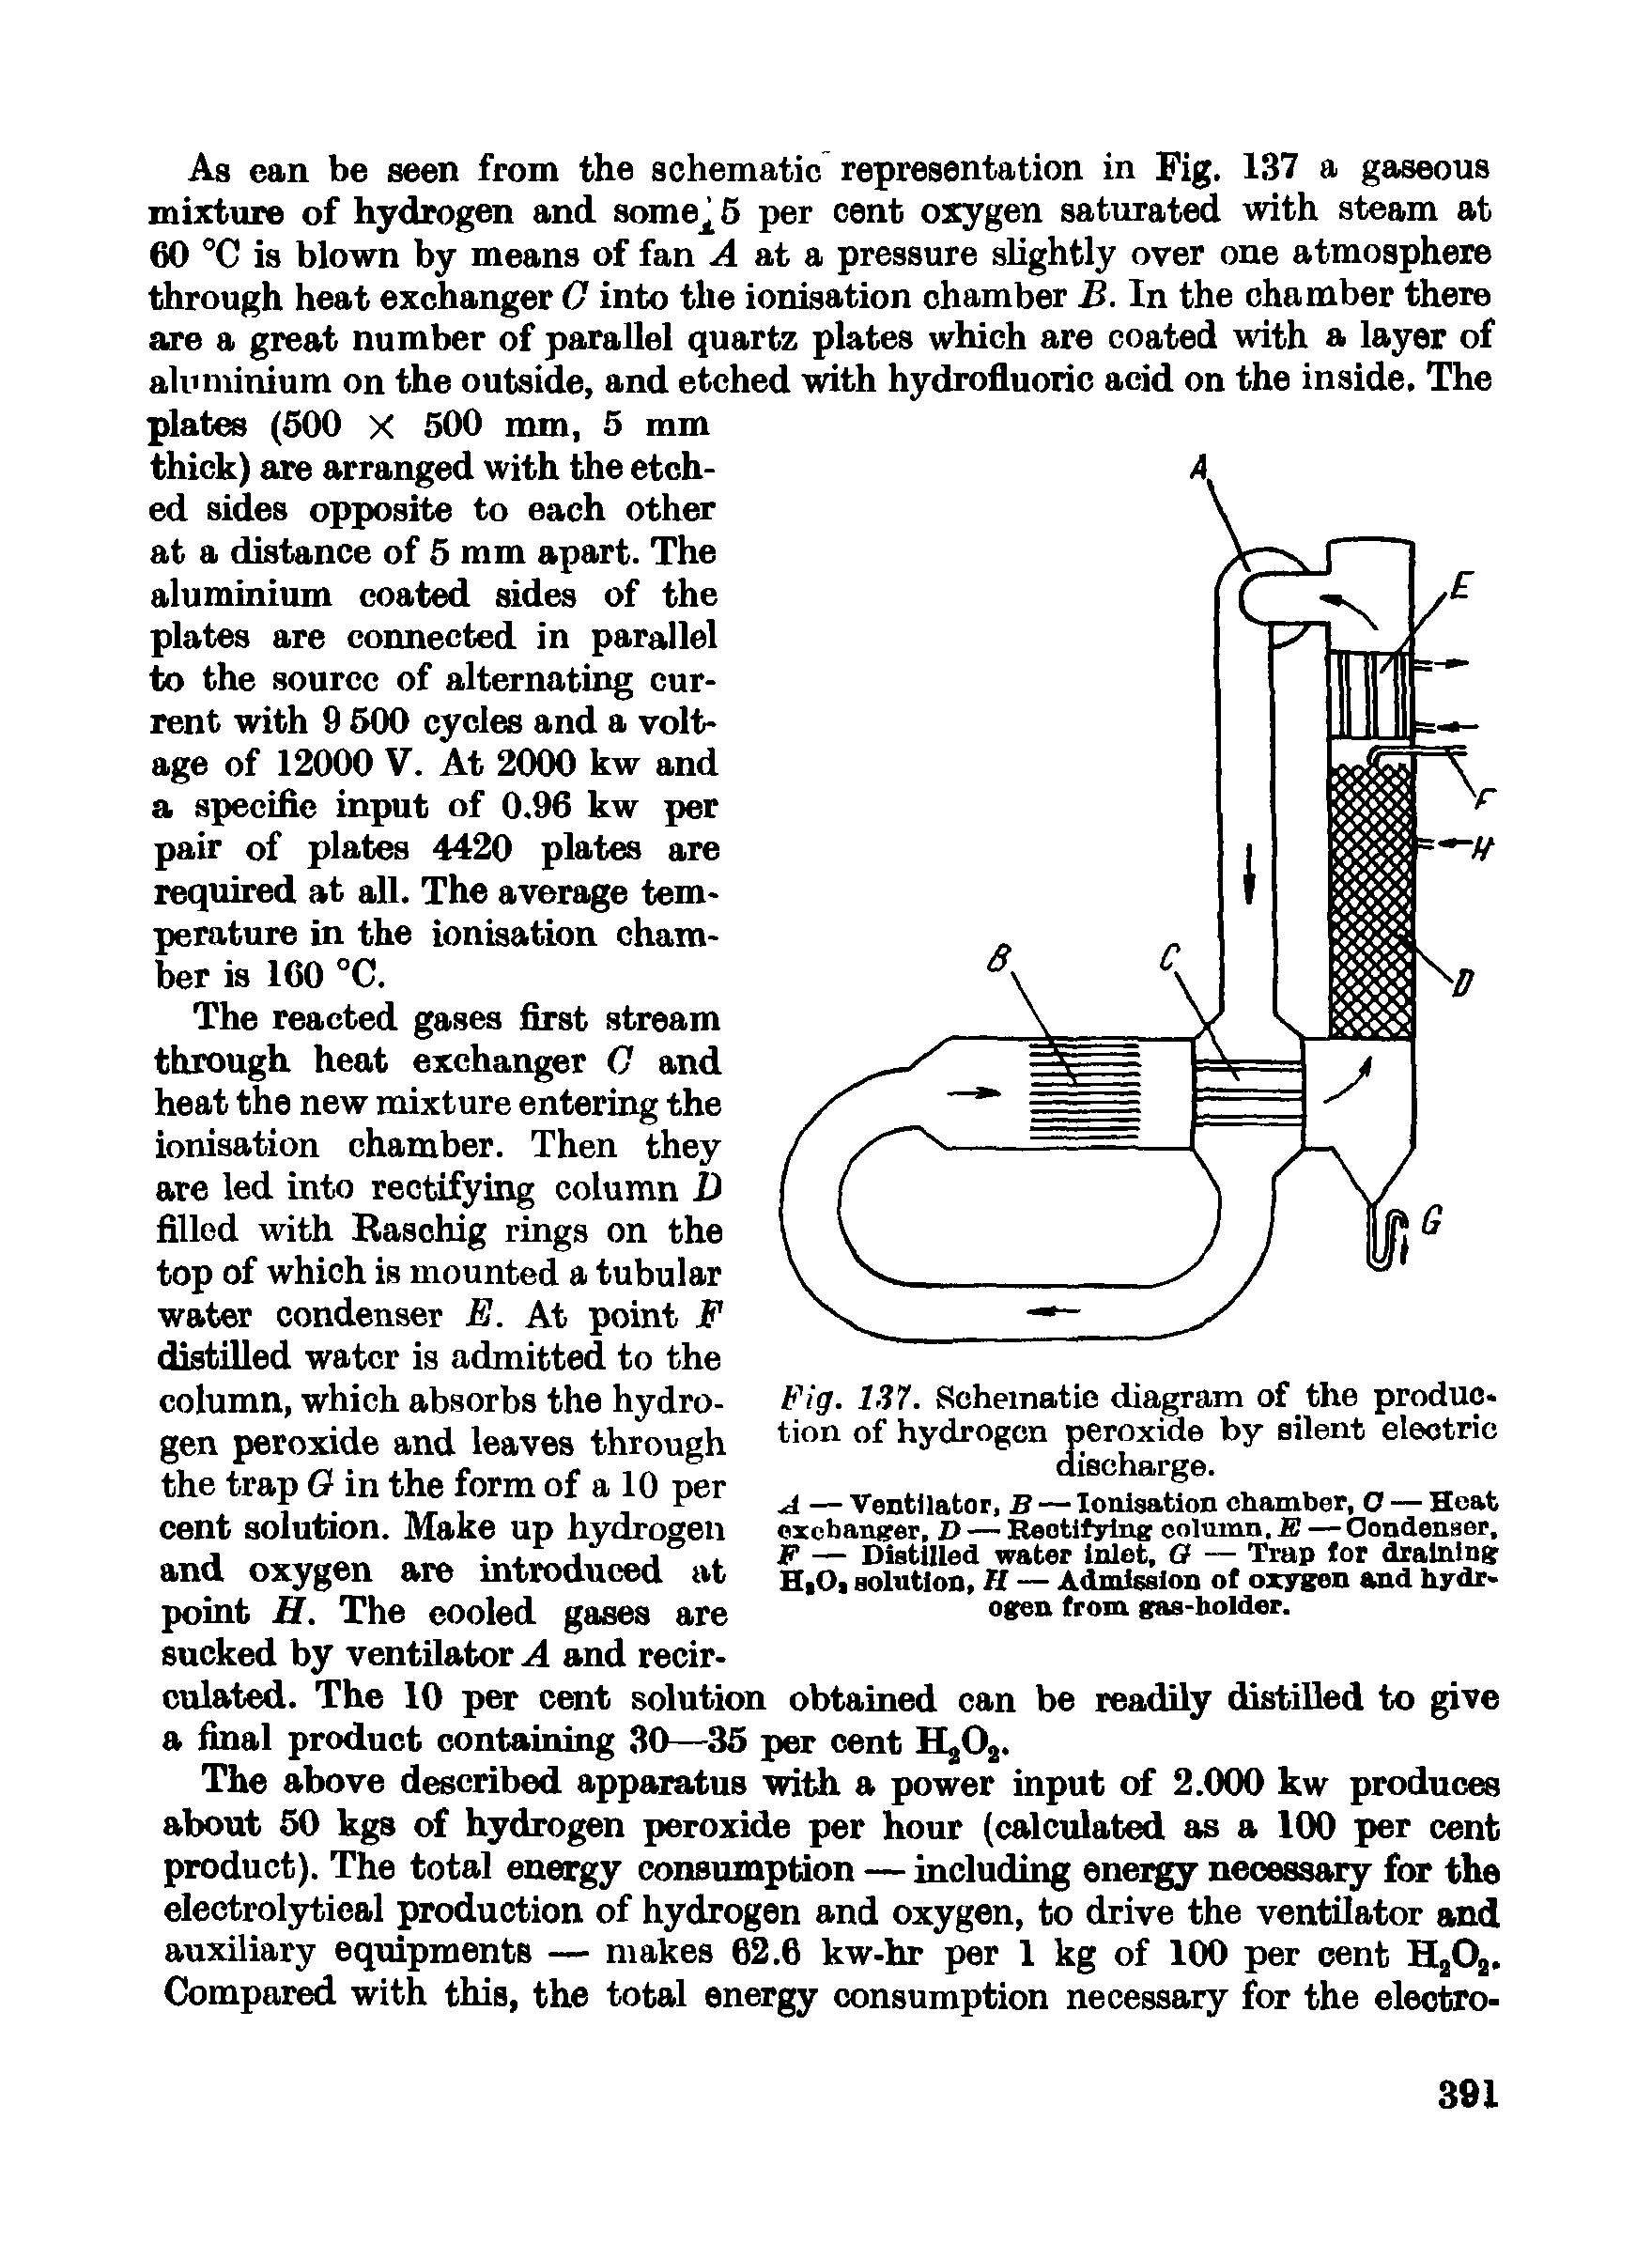 Fig. 137. Schematic diagram of the production of hydrogen peroxide by silent electric discharge.